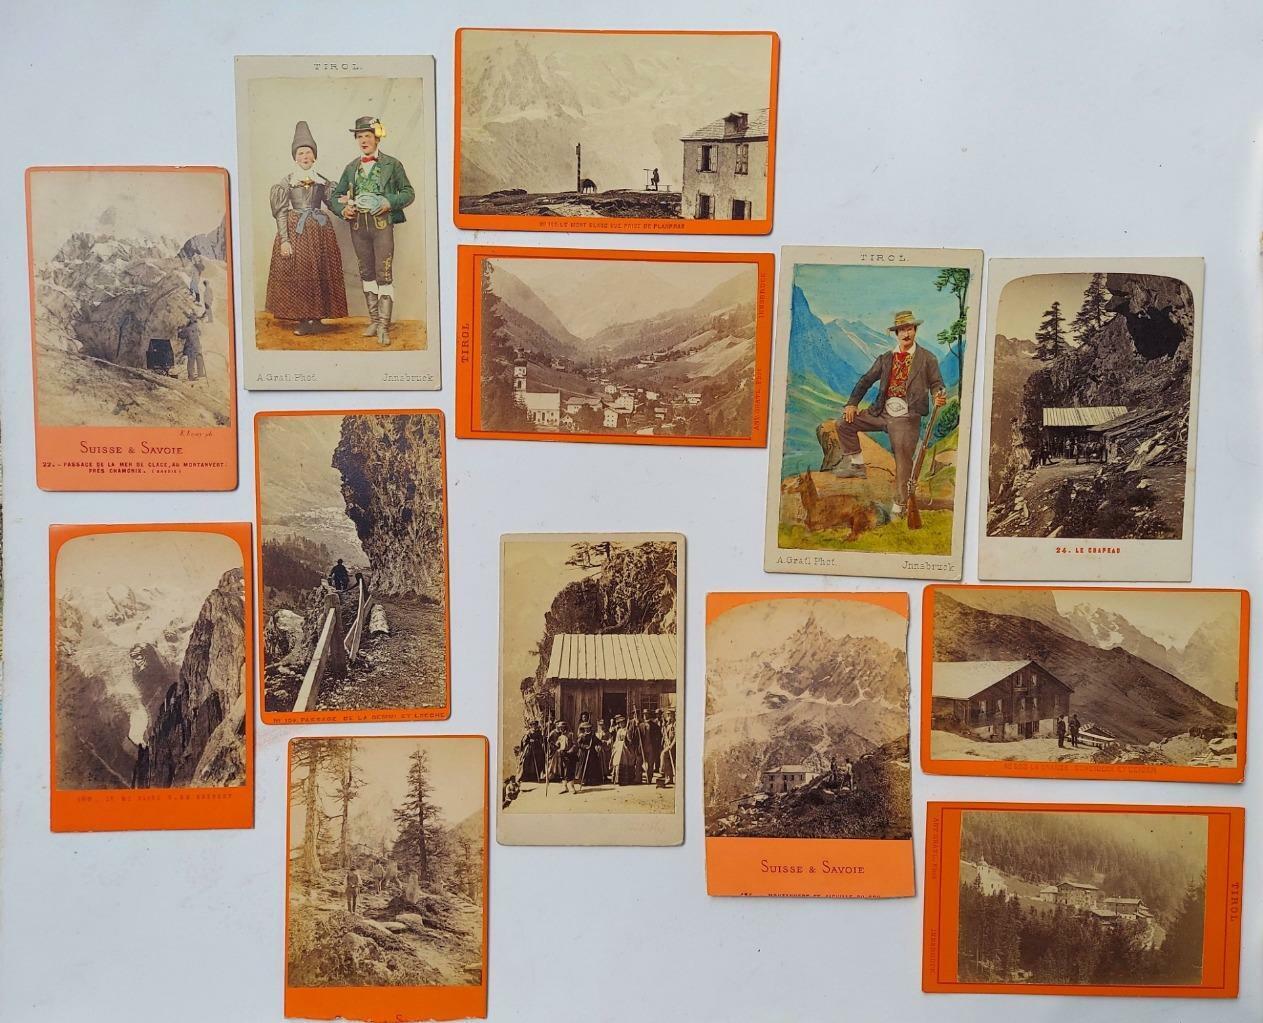 CDV Photo Collection of Swiss Alps Hikers  Exceptional images